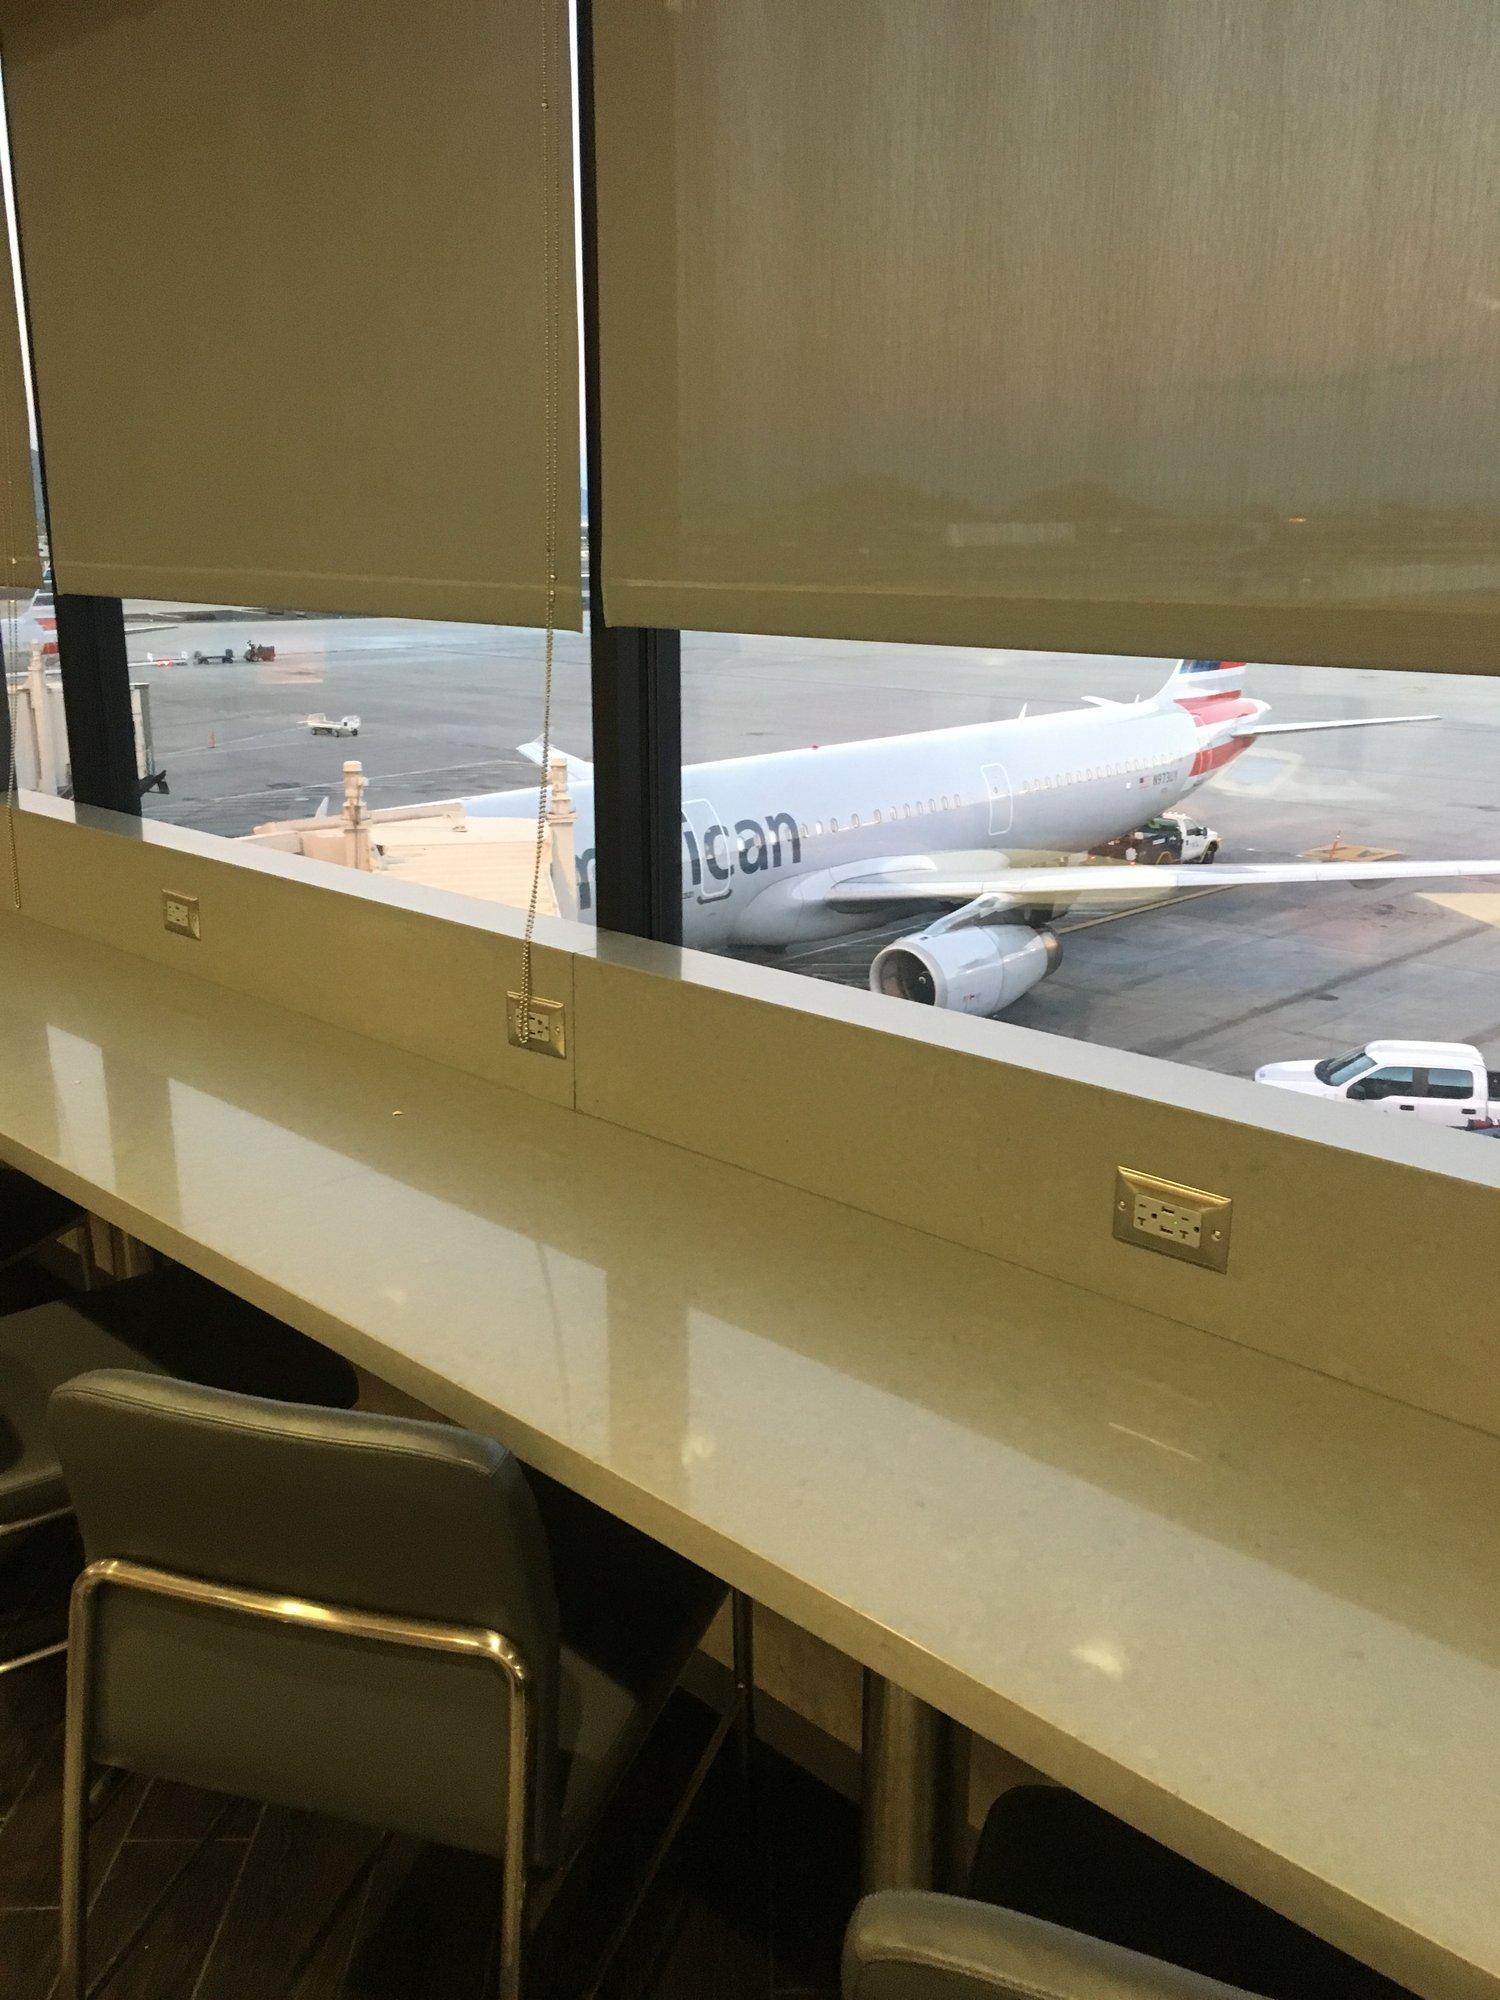 American Airlines Admirals Club (Gate A7) image 9 of 25